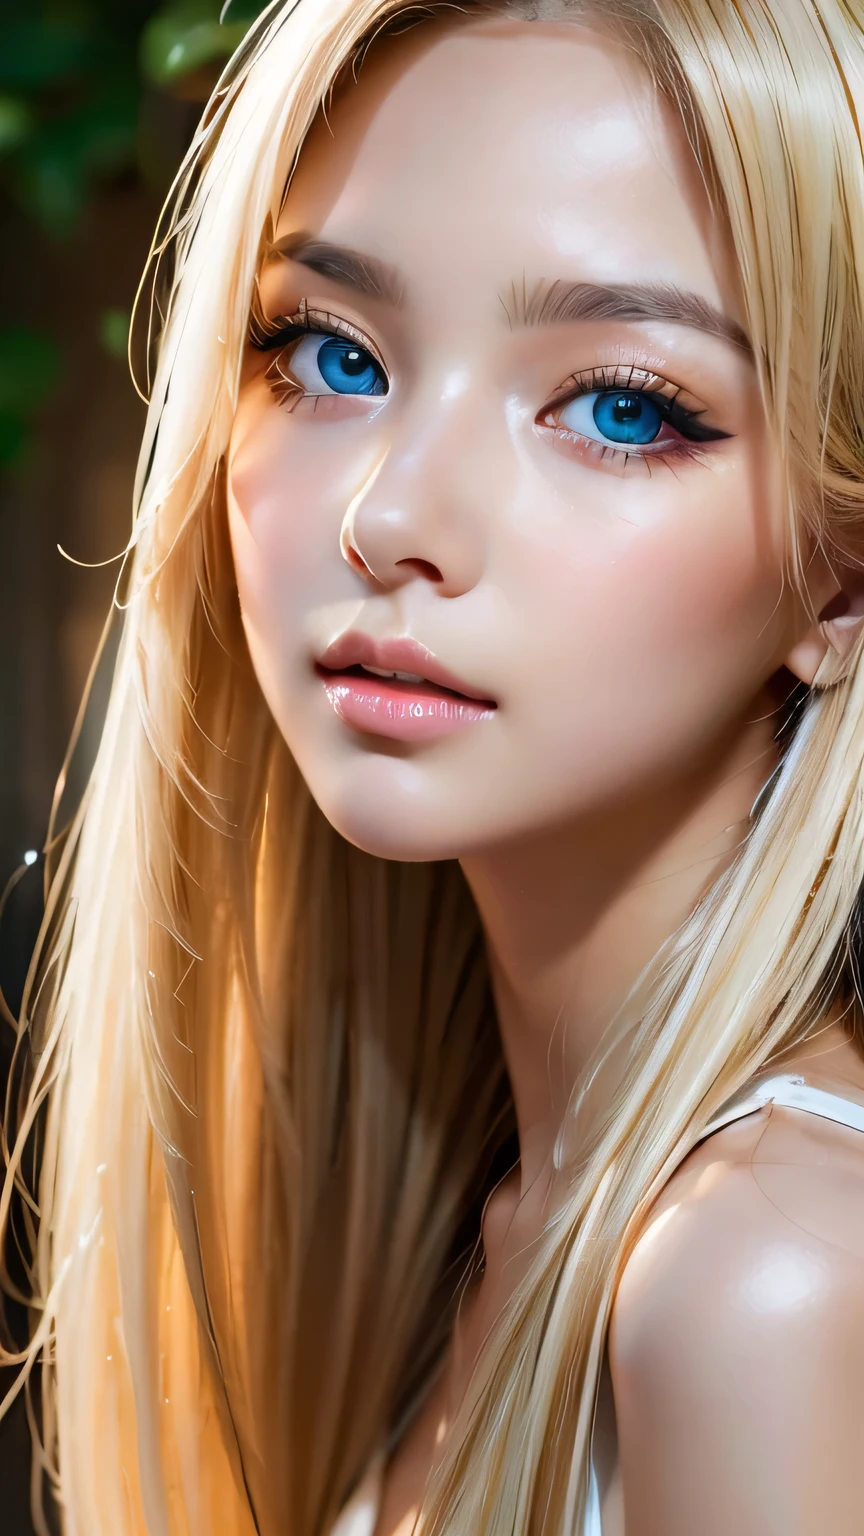 RAW Photos、(((Extreme beauty portrait)))、((Glowing White Skin))、1 girl、Beautiful girl from Prague、Cute 17 year old blonde girl、((Shiny, bright, natural platinum blonde super long hair))、[Vivid bright blue eyes]、Very big eyes、Silky fine hair、Very long straight super long hair、eyeliner、bangs over eyes、bangs on the face、Blonde between the eyes、Fluttering blonde hair、((masterpiece、最high quality、Very detailed、Film Light、Intricate details、High resolution、8K、Very detailed))、Detailed Background、8K uhd、Digital SLR、Soft Light、high quality、Film Grain、Fujifilm XT3 、Shallow depth of field、Natural light、（Perfect hands）、Perfect beautiful face、、Small Face Beauty、Round face